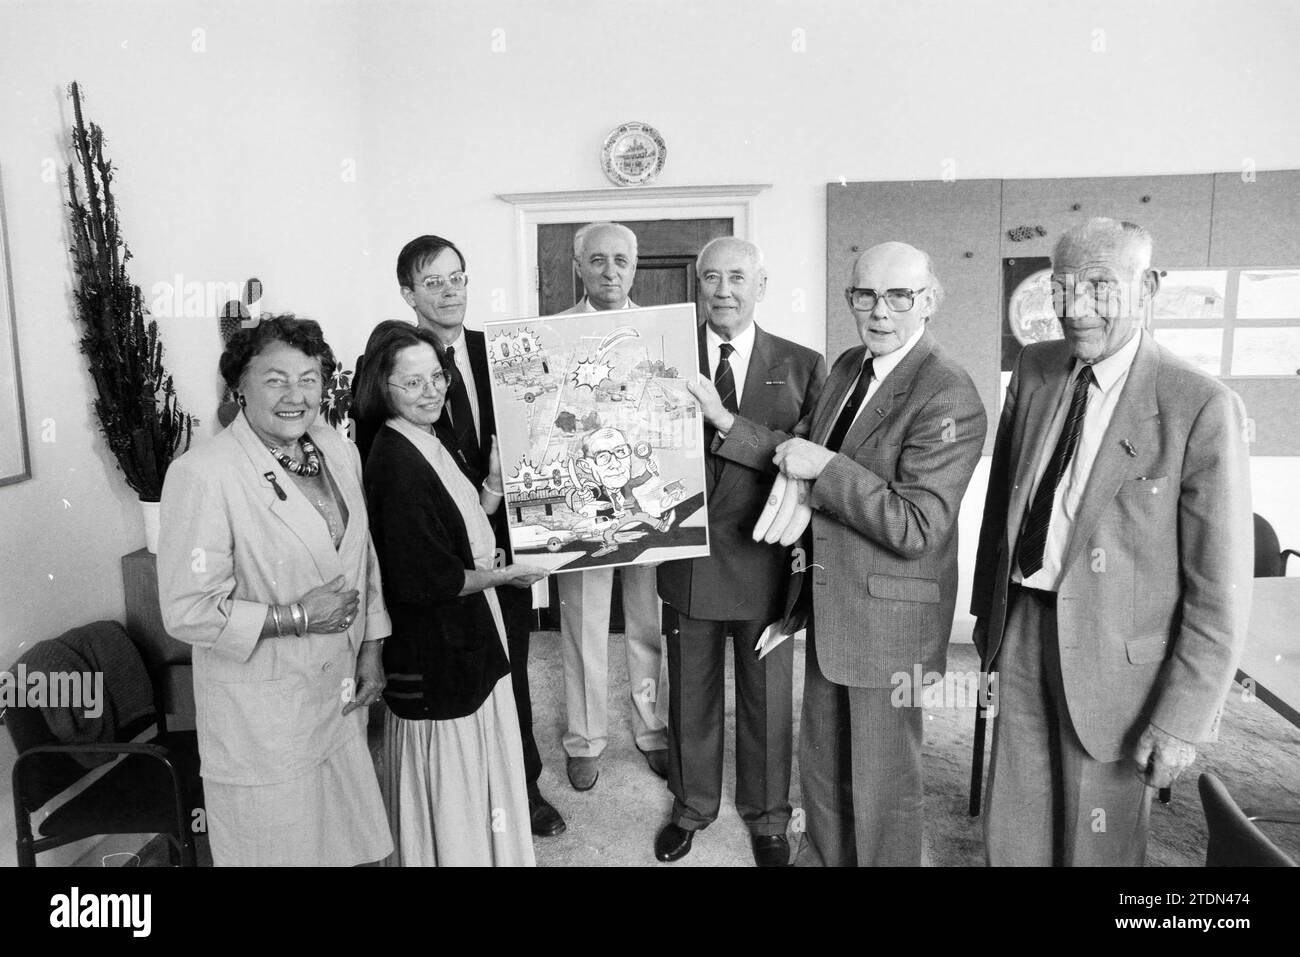 Man in Heemstede town hall receives framed cartoon with traffic theme (group portrait), Heemstede, The Netherlands, 25-04-1990, Whizgle News from the Past, Tailored for the Future. Explore historical narratives, Dutch The Netherlands agency image with a modern perspective, bridging the gap between yesterday's events and tomorrow's insights. A timeless journey shaping the stories that shape our future Stock Photo